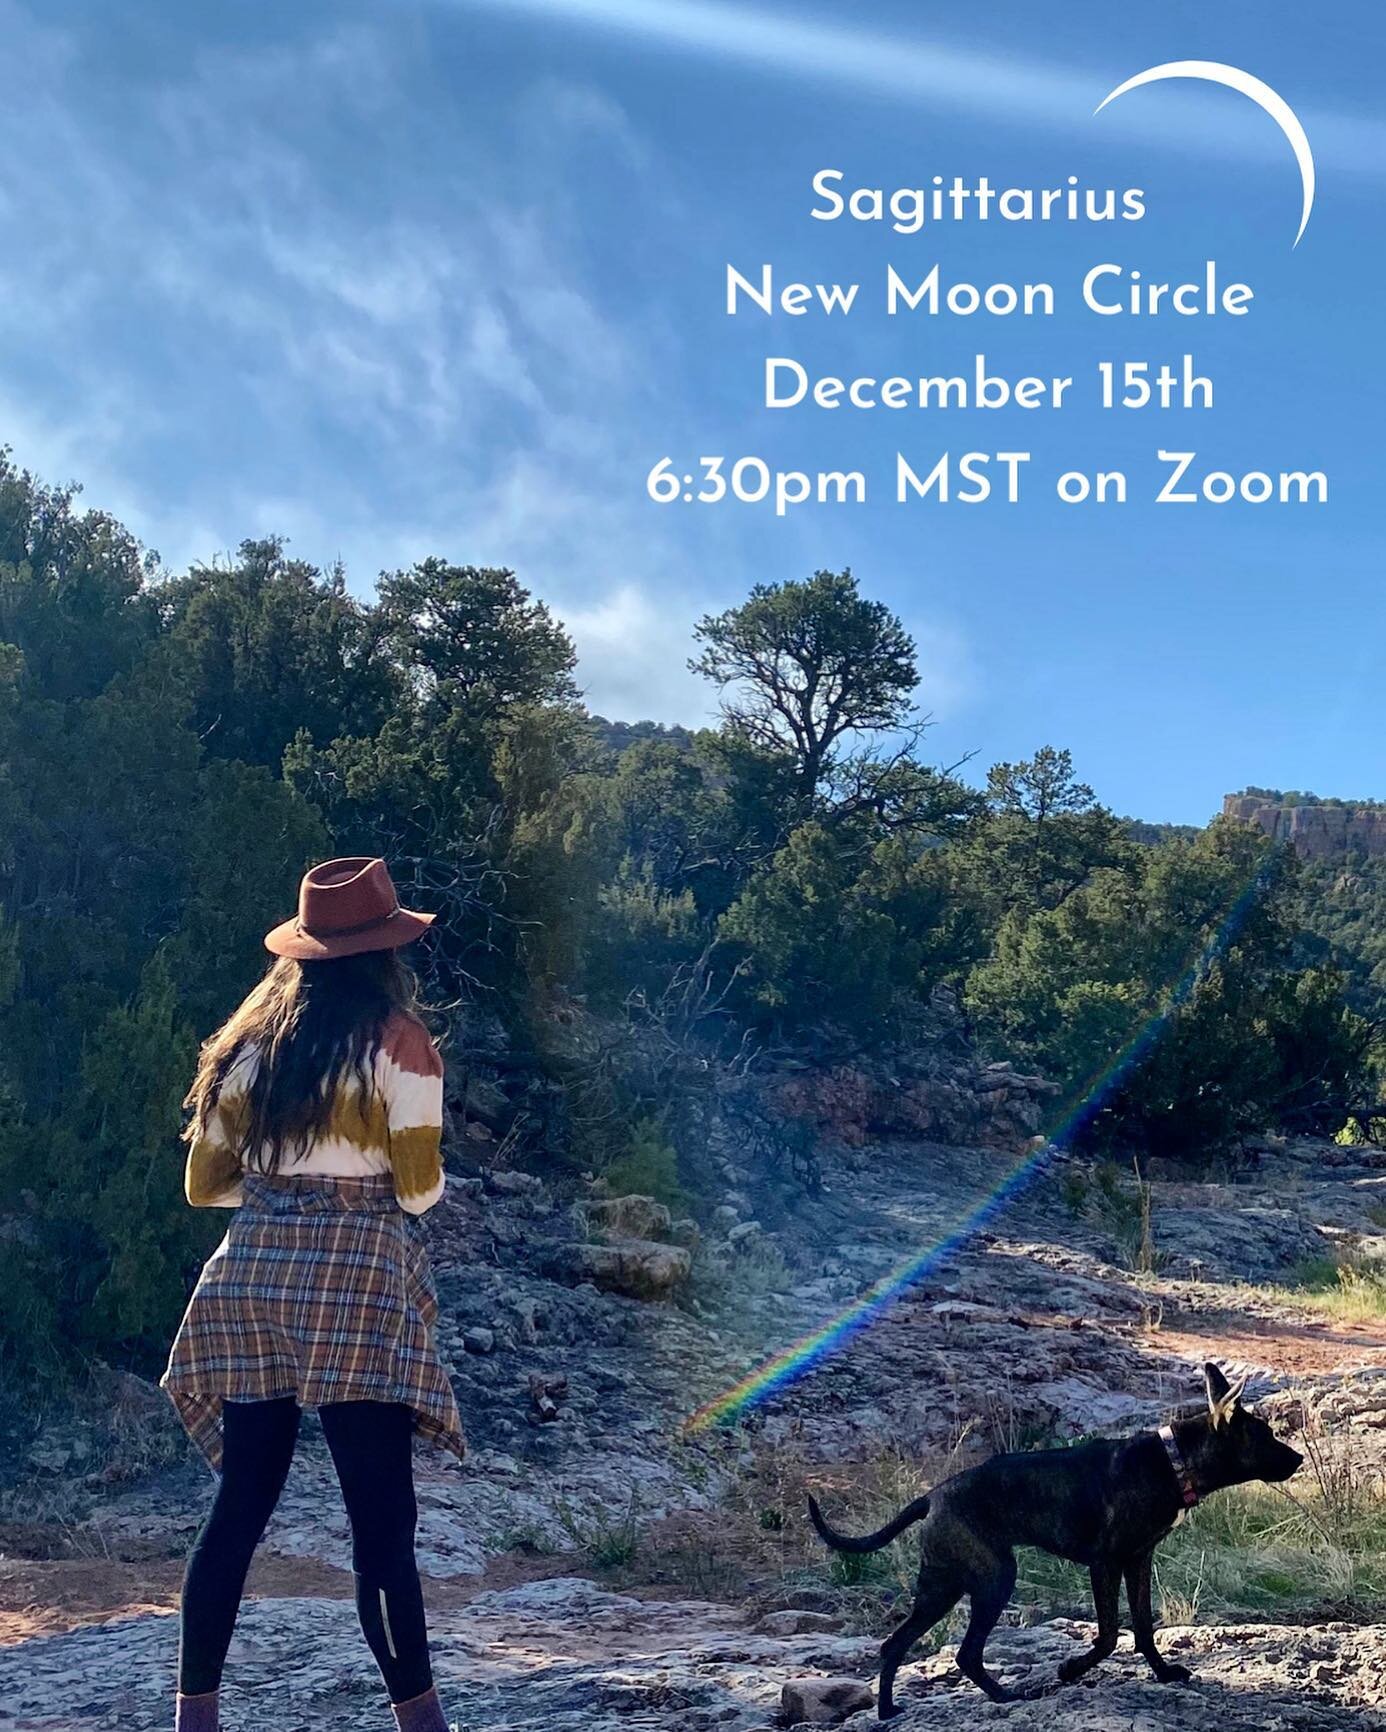 Hellooo Sagittarius season (my personal fave) 🏹 

Join us on Dec. 15th on Zoom to honor the gypsy, the learner and the philosopher within each of us 🌎 

We&rsquo;ll explore Sag energy with meditation, movement, journaling, intention setting and dee